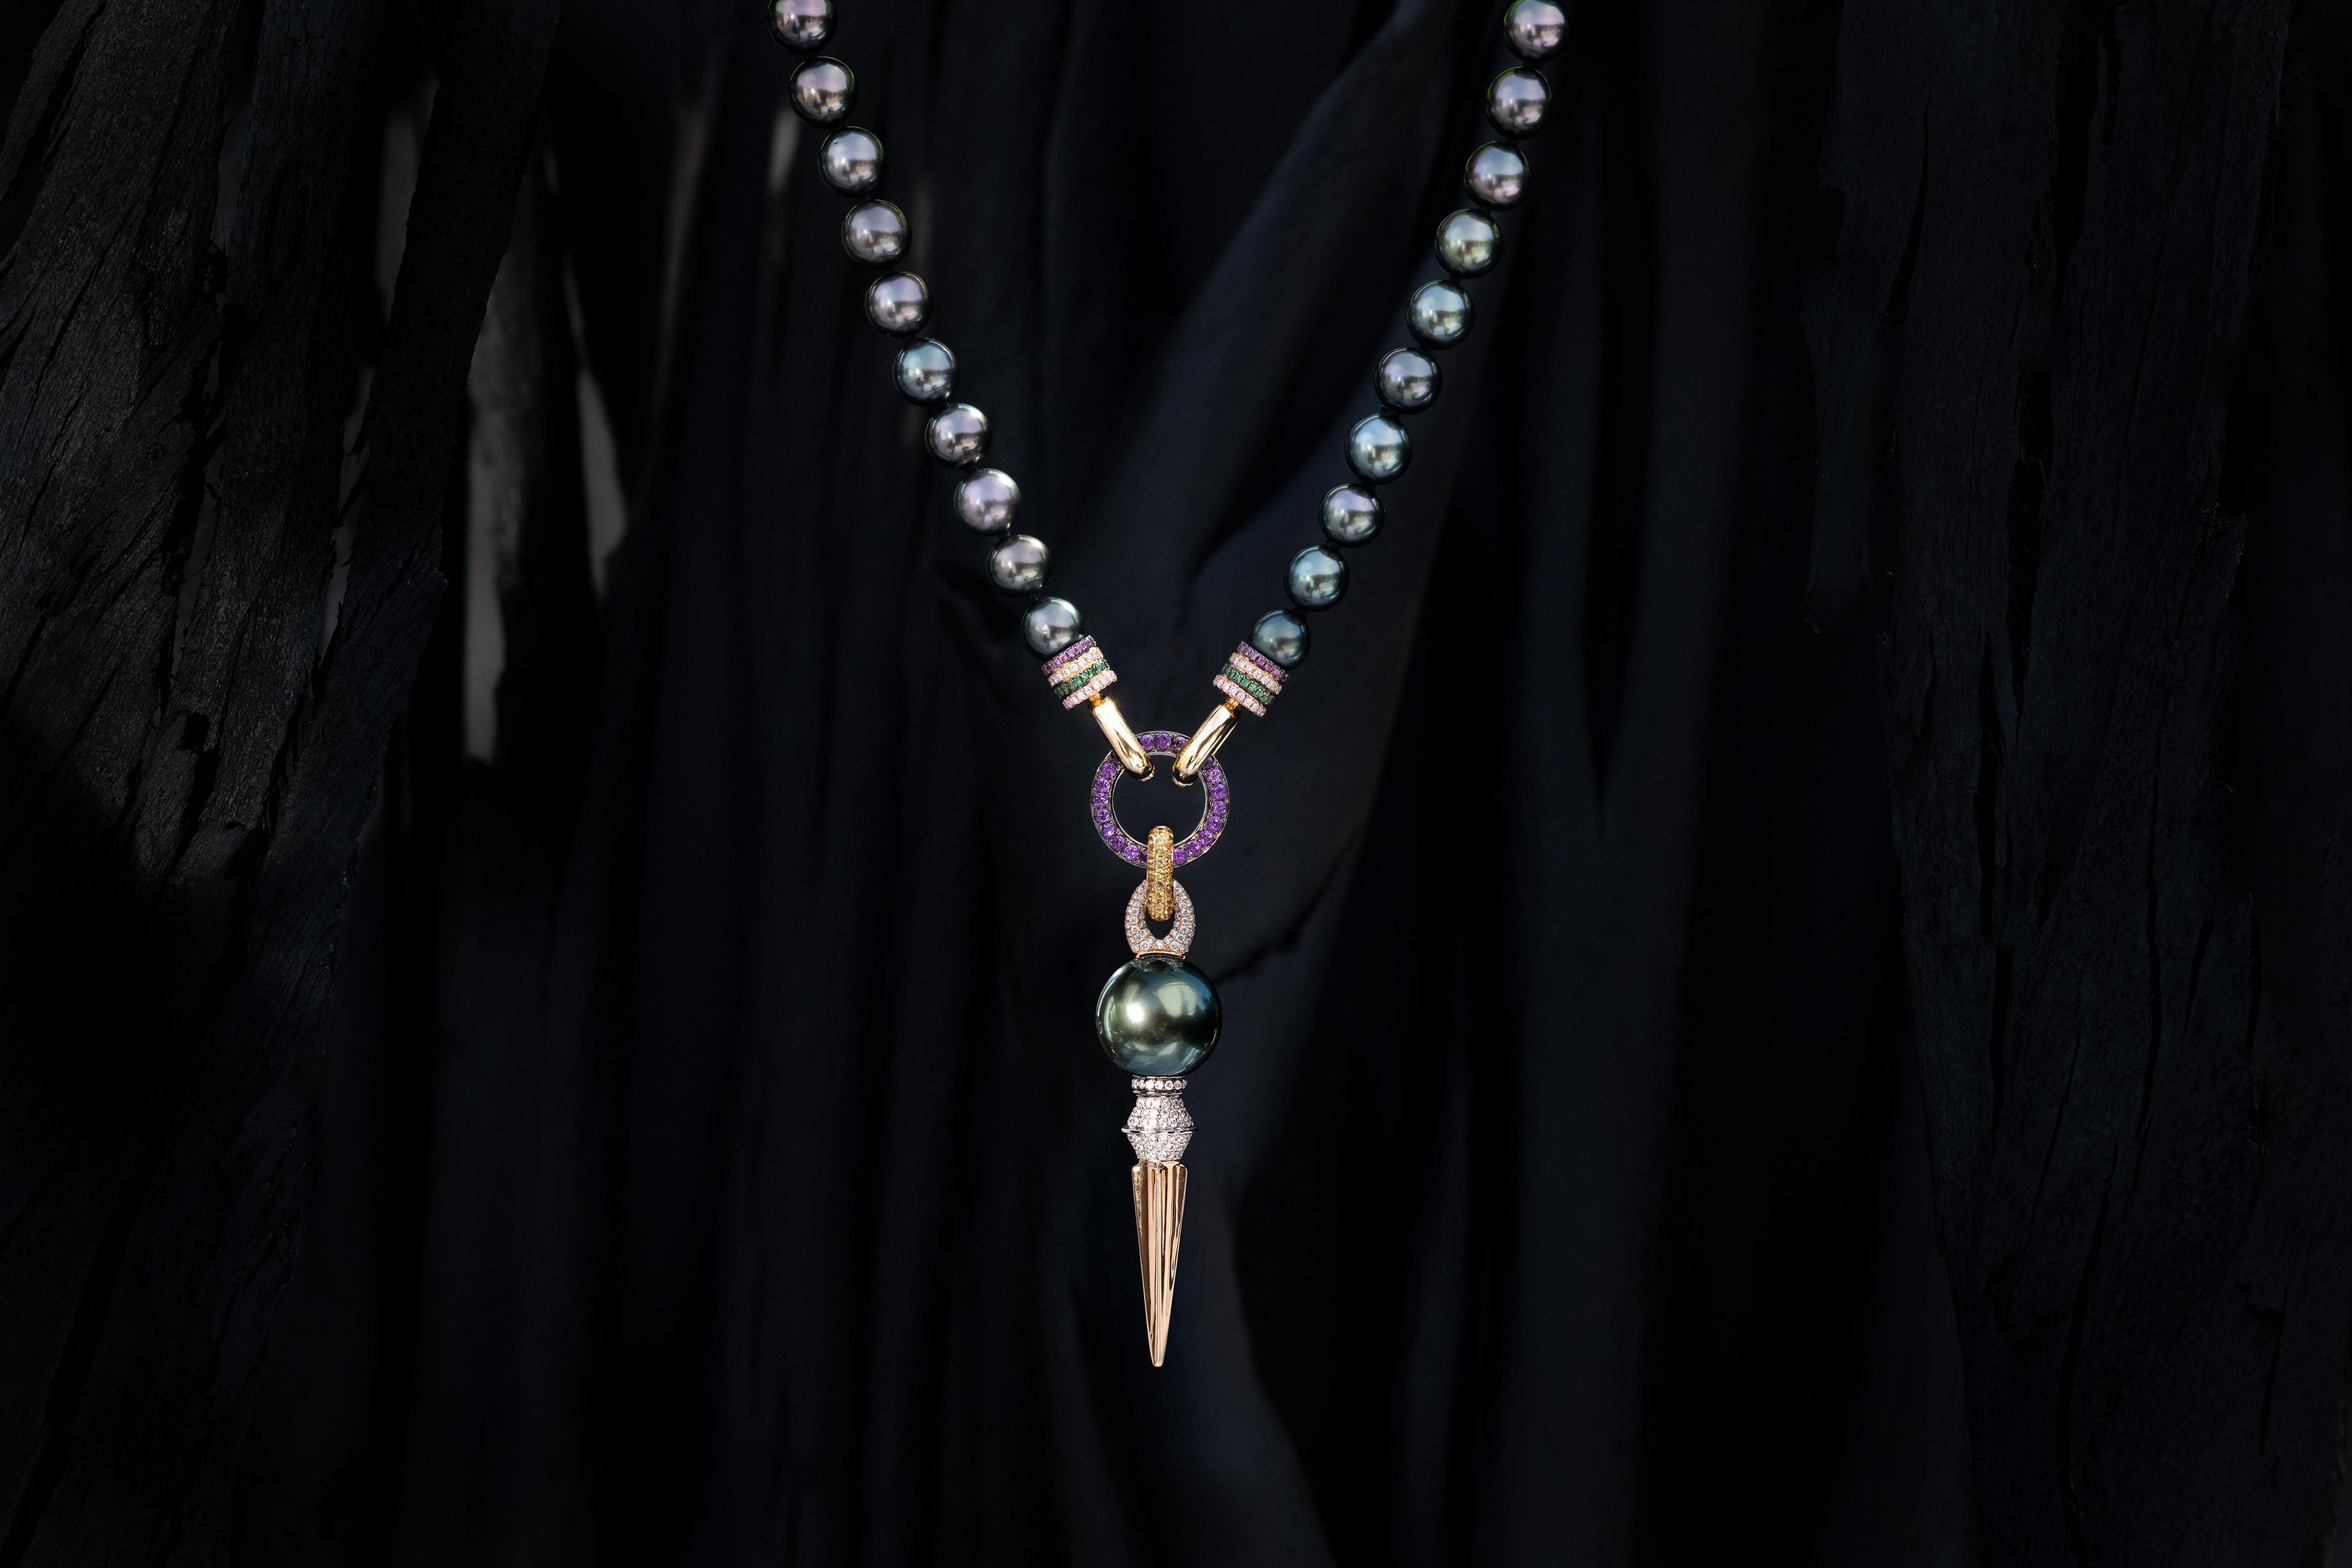 Rosa Van Parys signature 8MM Tahitian Pearl necklace (AAA quality) in 18 Karat yellow Gold + white Diamonds, Tsavorites and Rhodelites front clasp. Paired with a 18 karat black Gold + Amethysts add-on ring and a 18k yellow Gold + yellow Sapphires